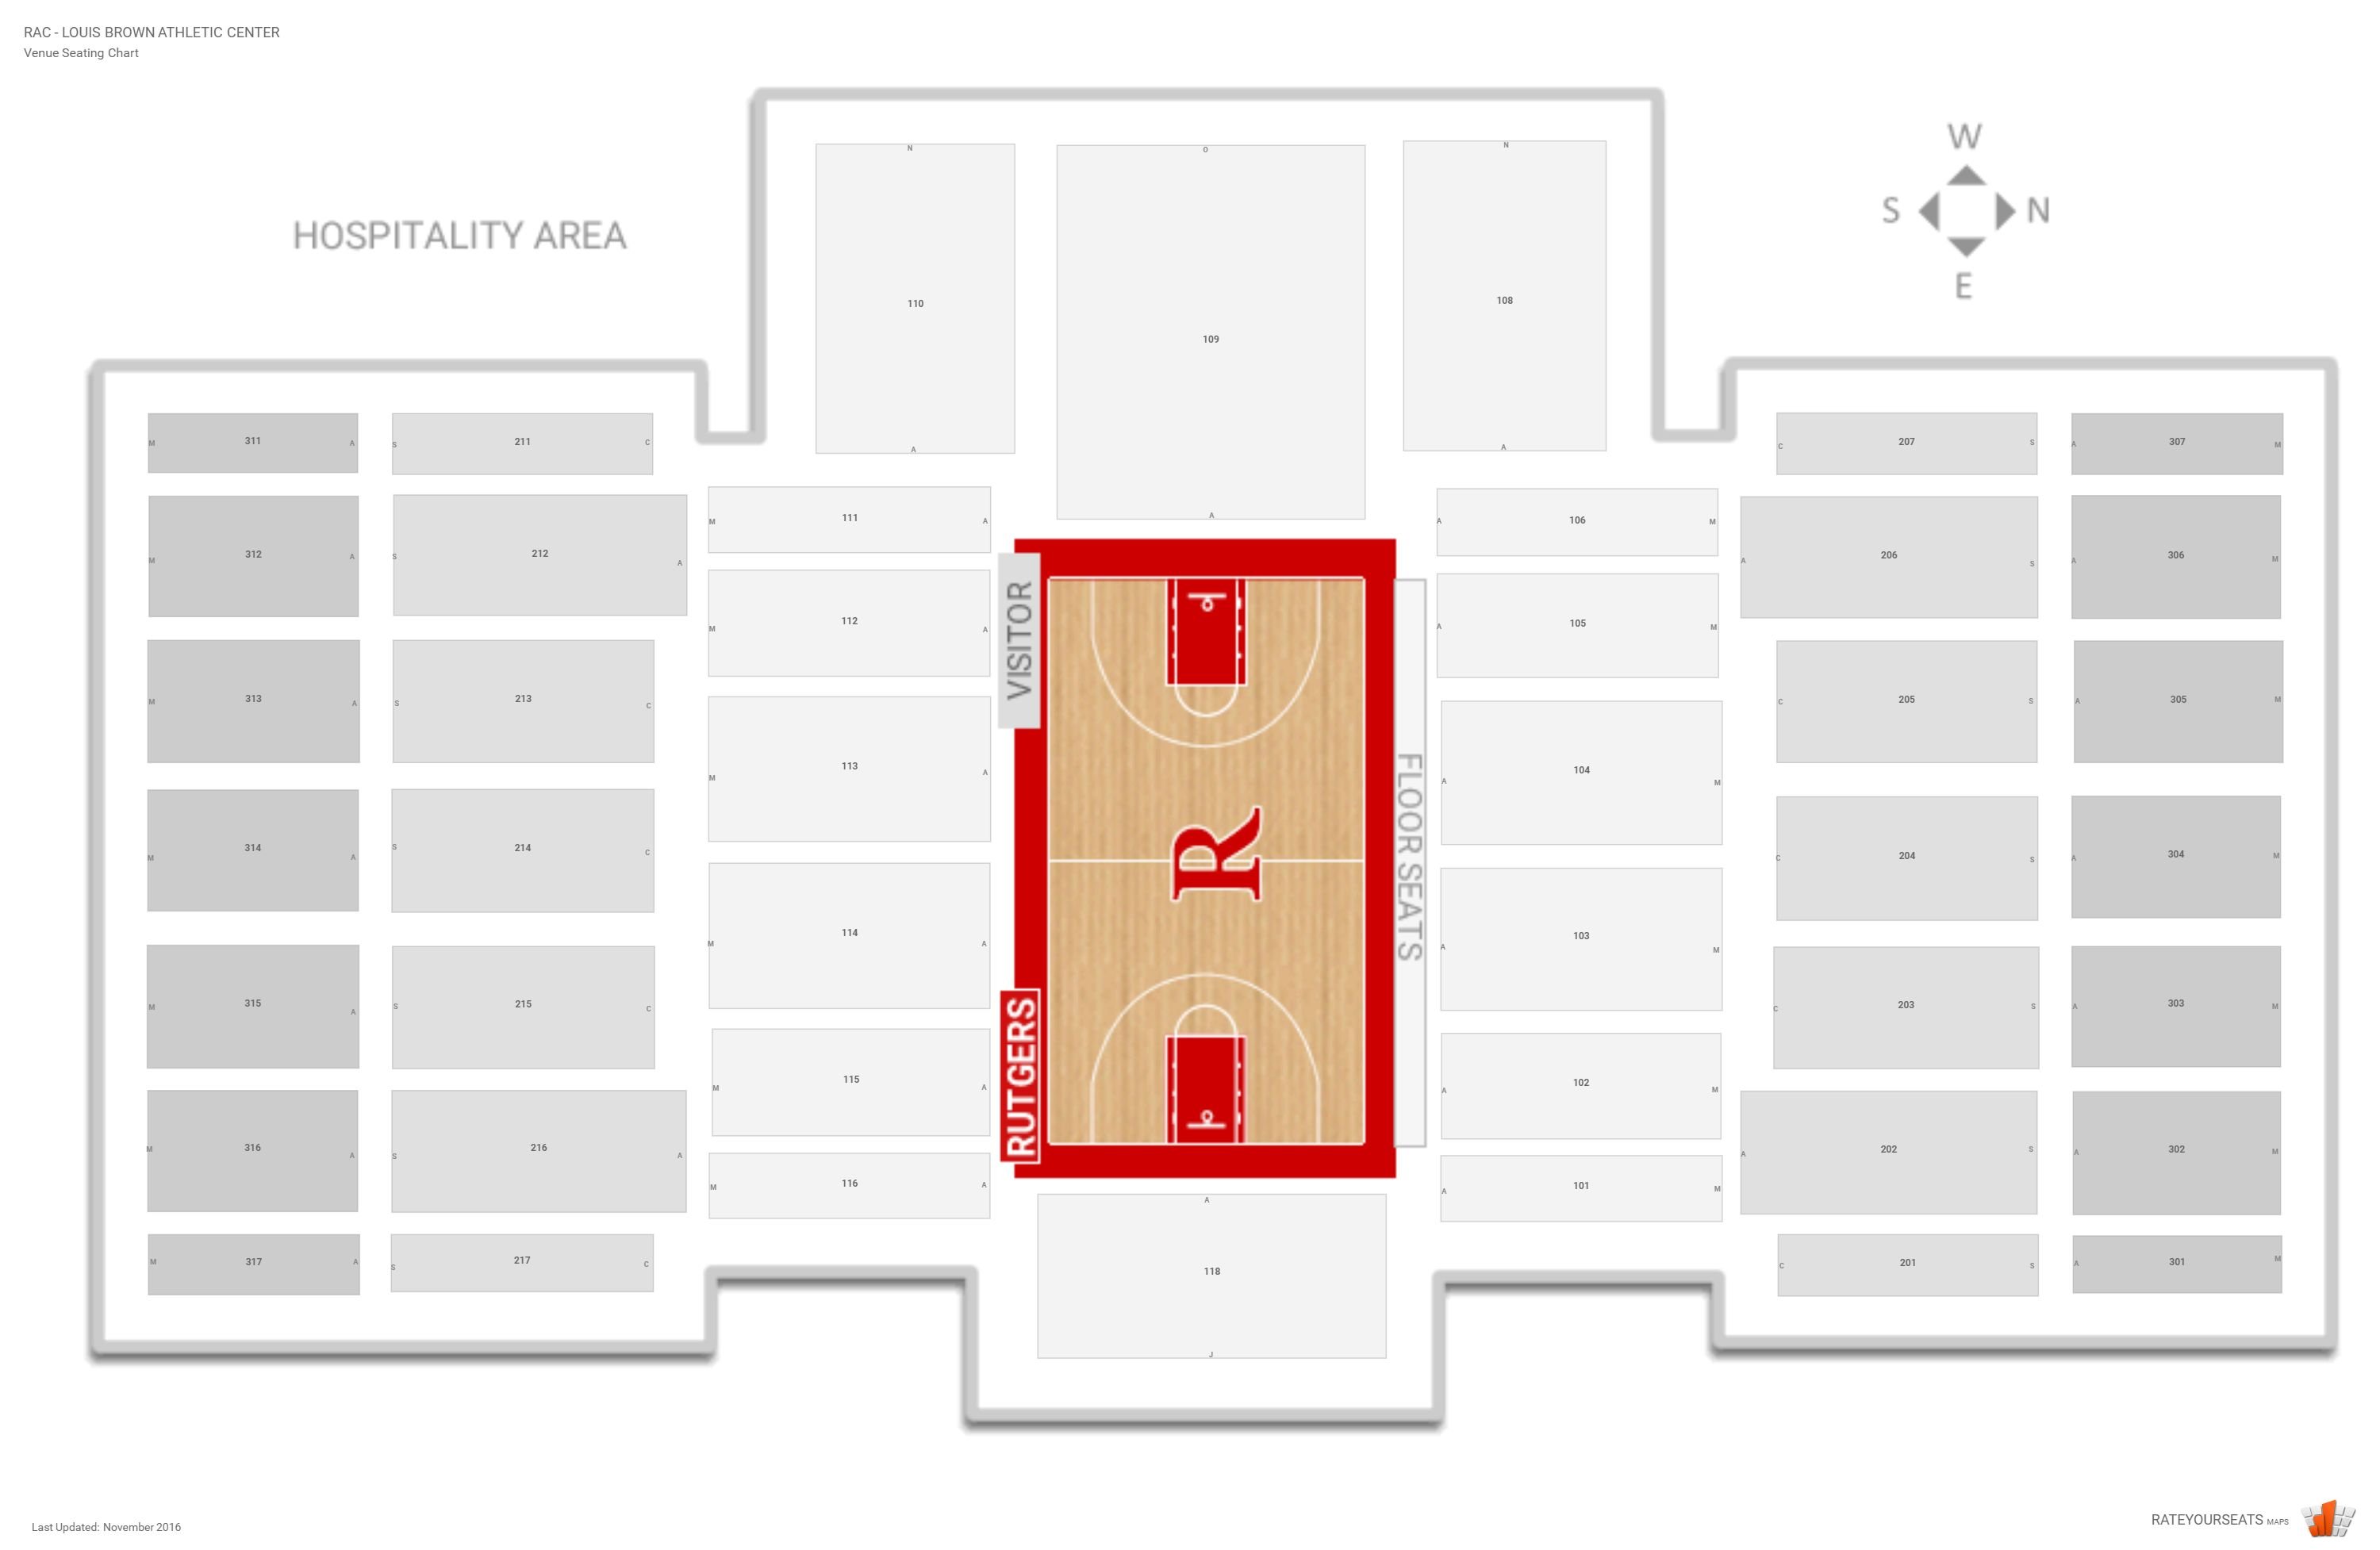 Njpac Seating Chart With Seat Numbers